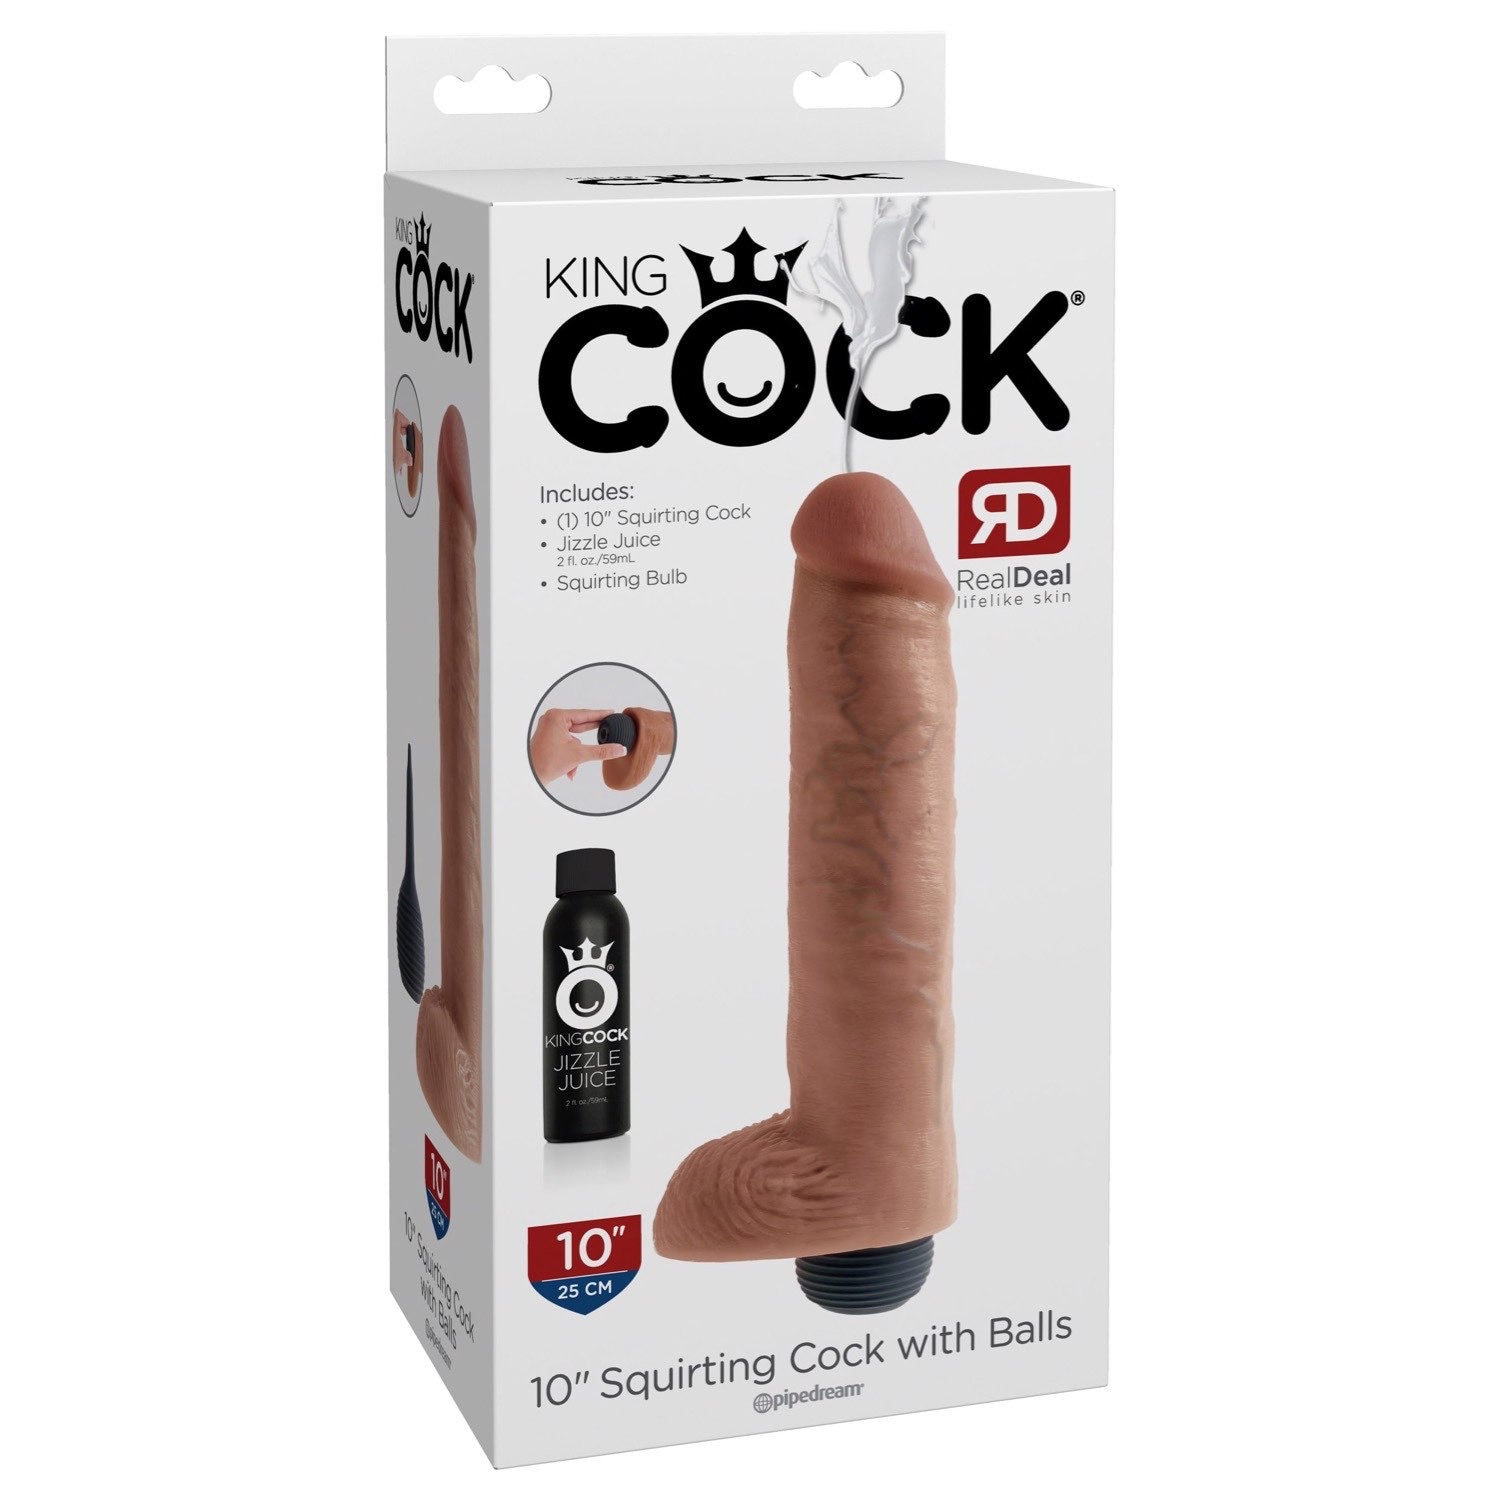 King Cock 10&quot; Squirting Dong With Balls - Flesh 25.4 cm (10&quot;) Squirting Dong by Pipedream